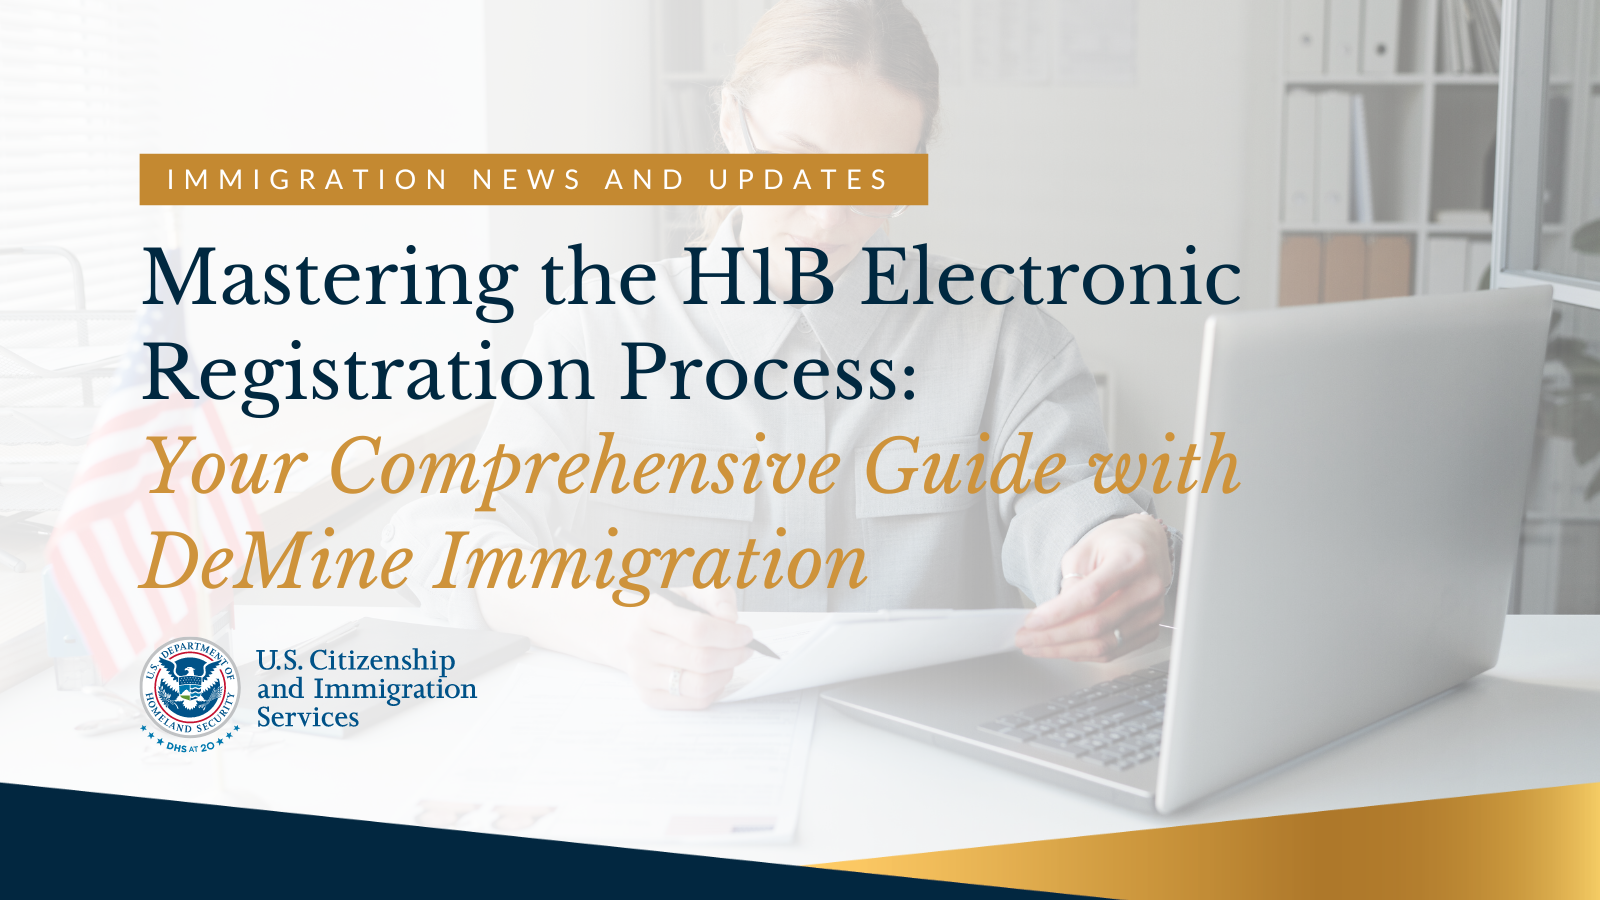 Mastering the H1B Electronic Registration Process: Your Comprehensive Guide with DeMine Immigration